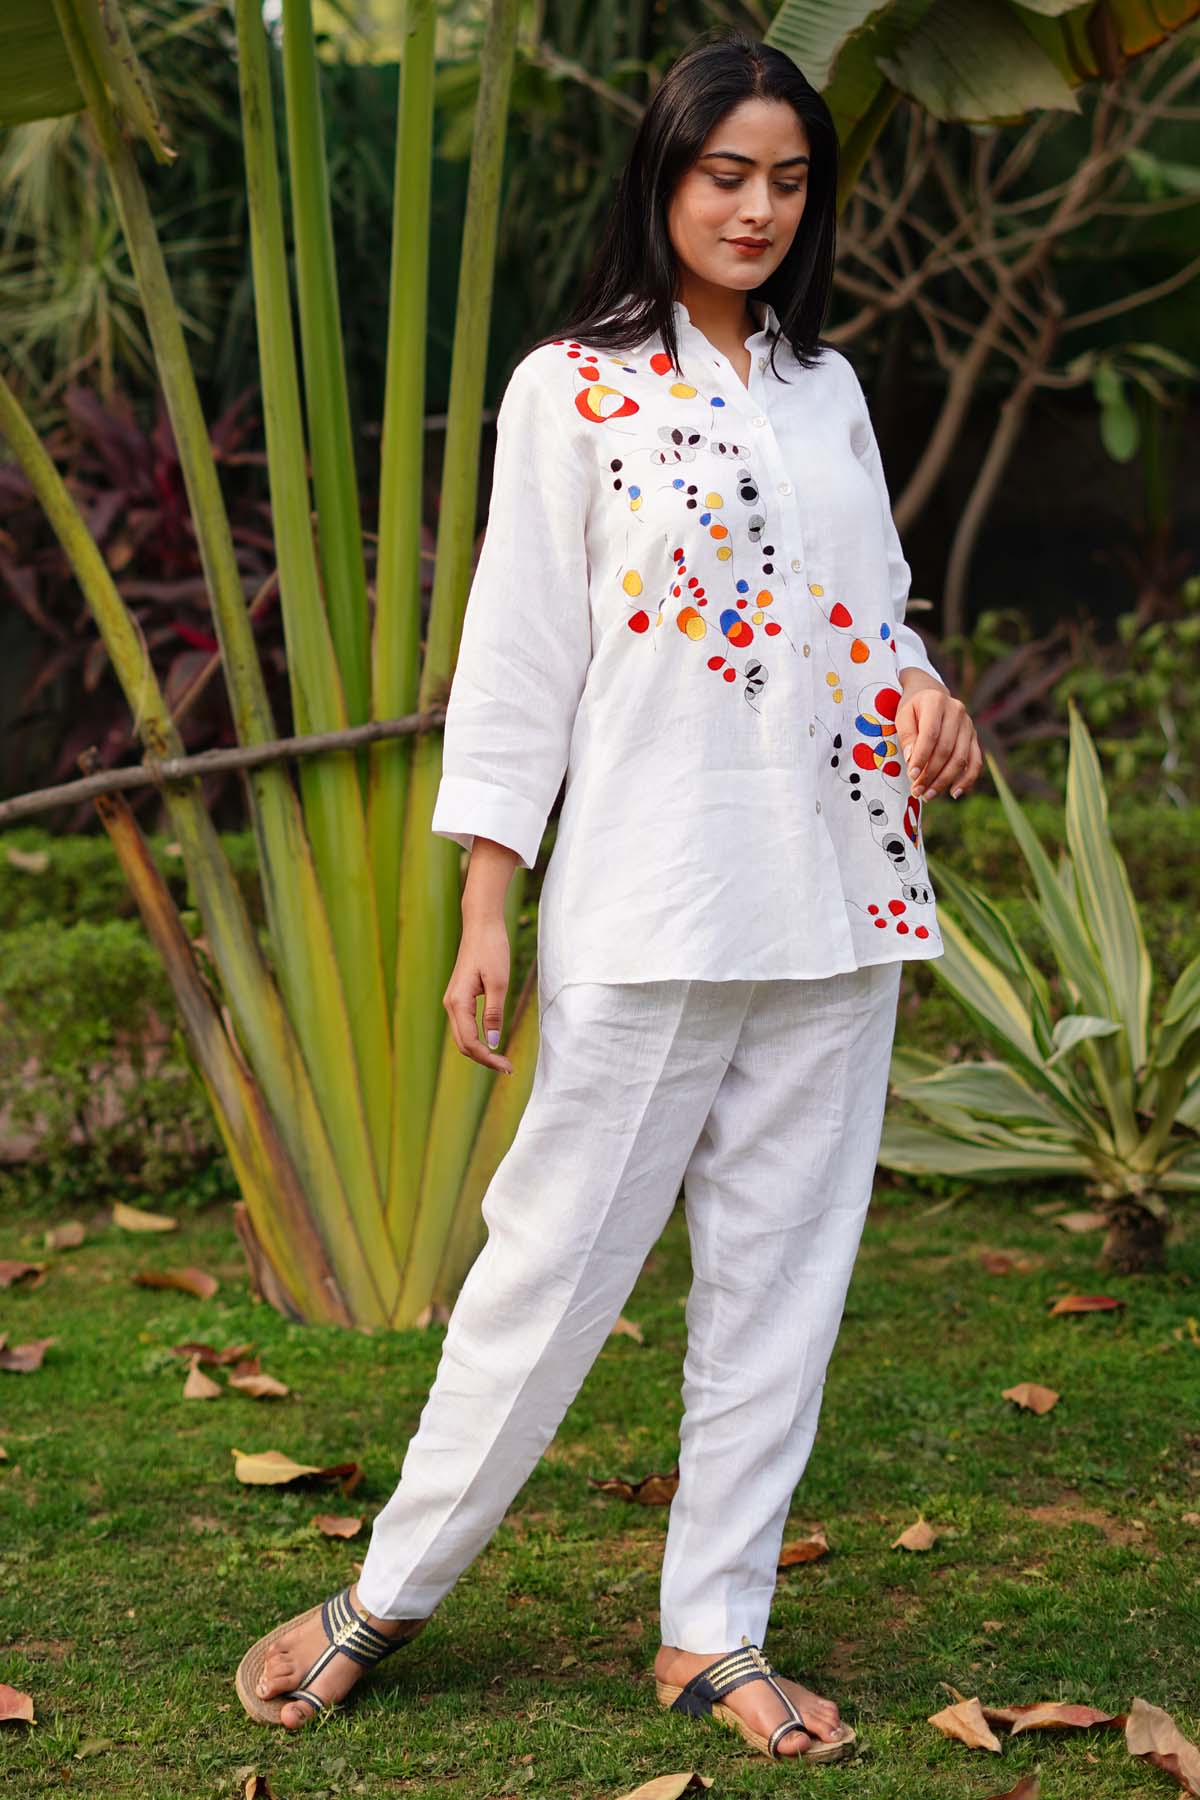 Designer Linen Bloom Bohemian Breezes: White Linen Shirt with Delicate Embroidery For Women Online at ScrollnShops